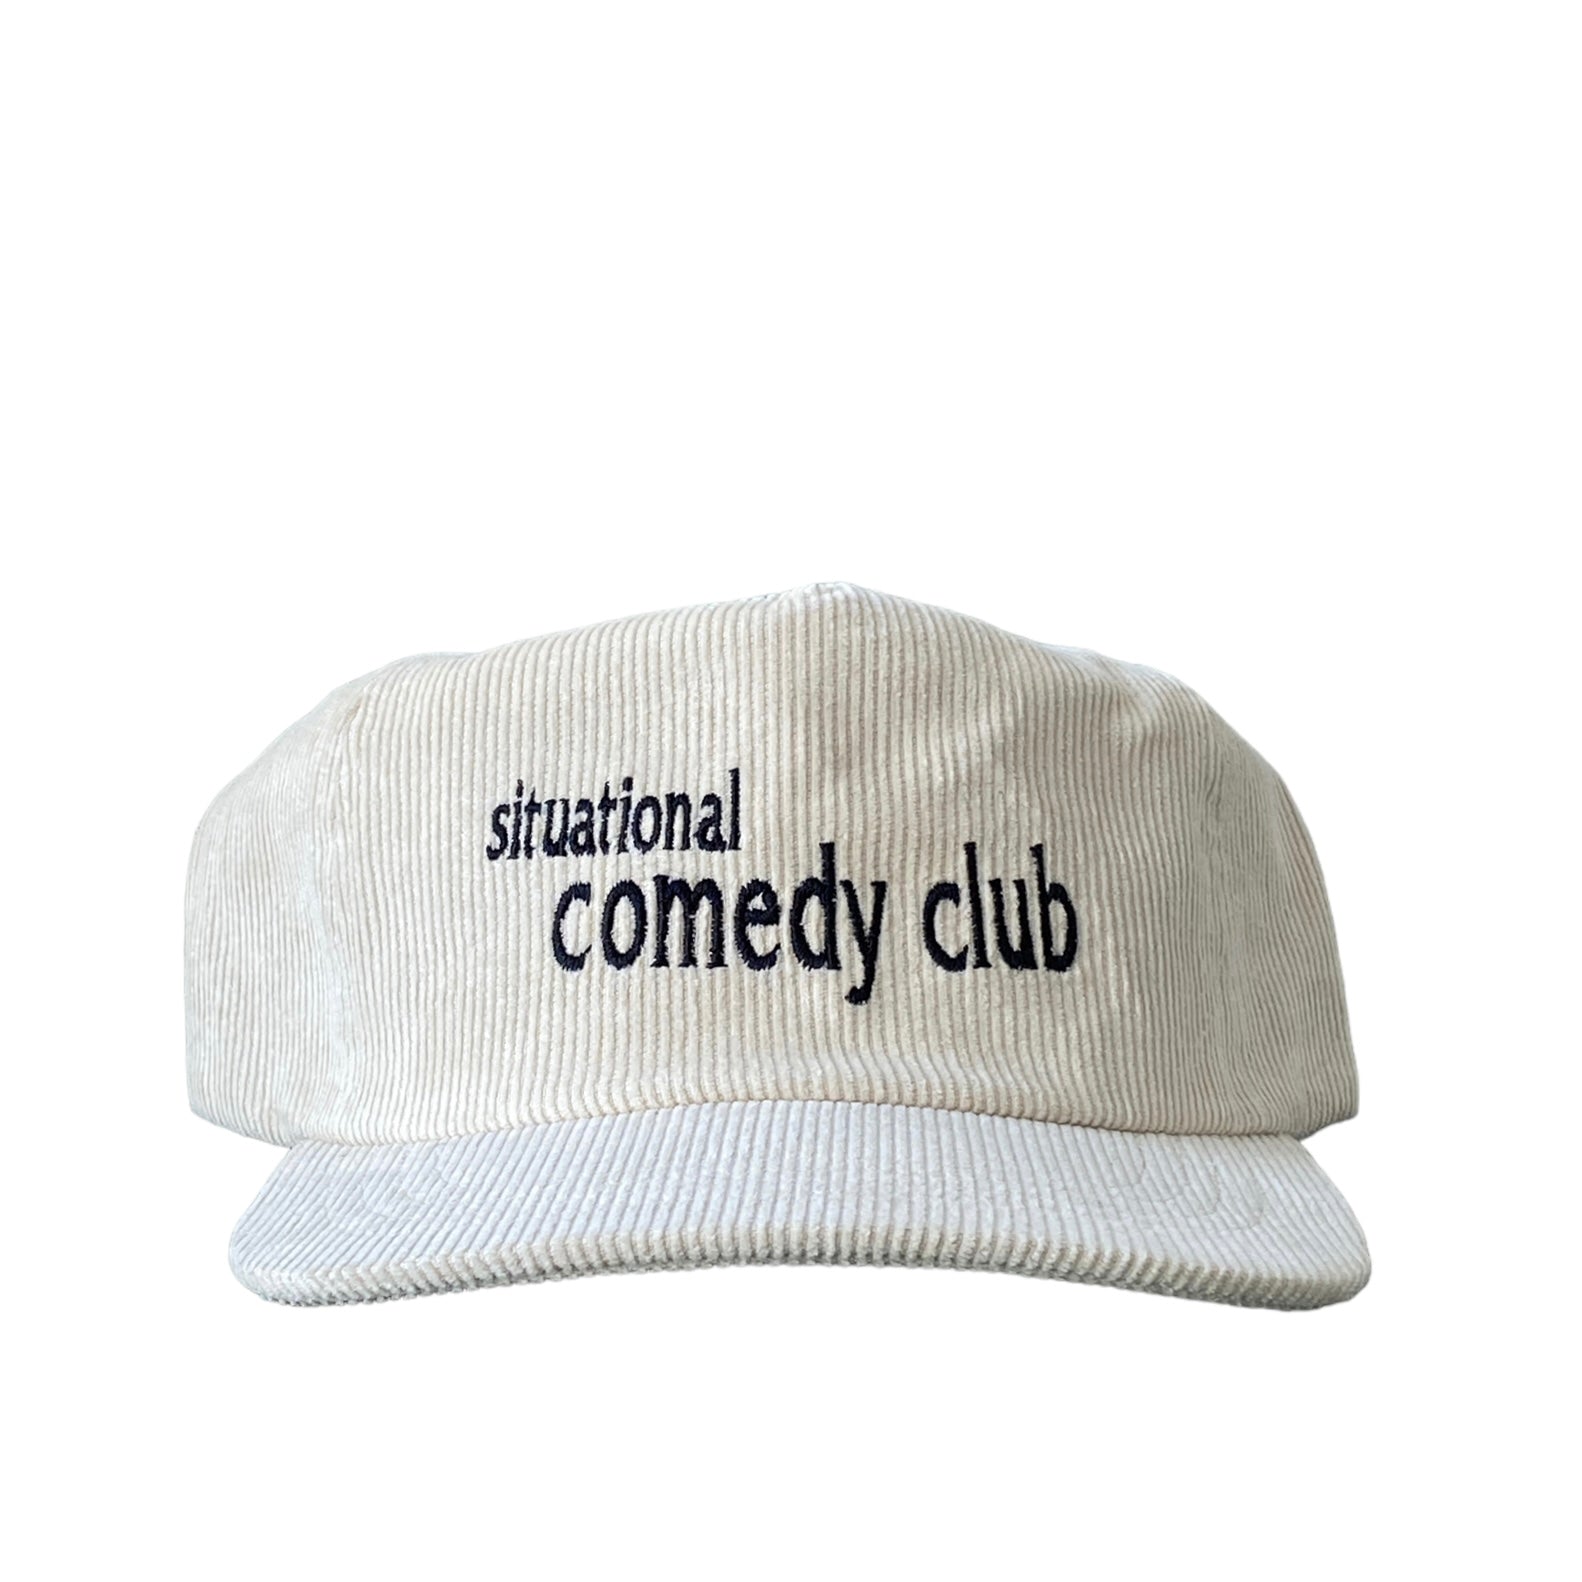 Situational Comedy Club